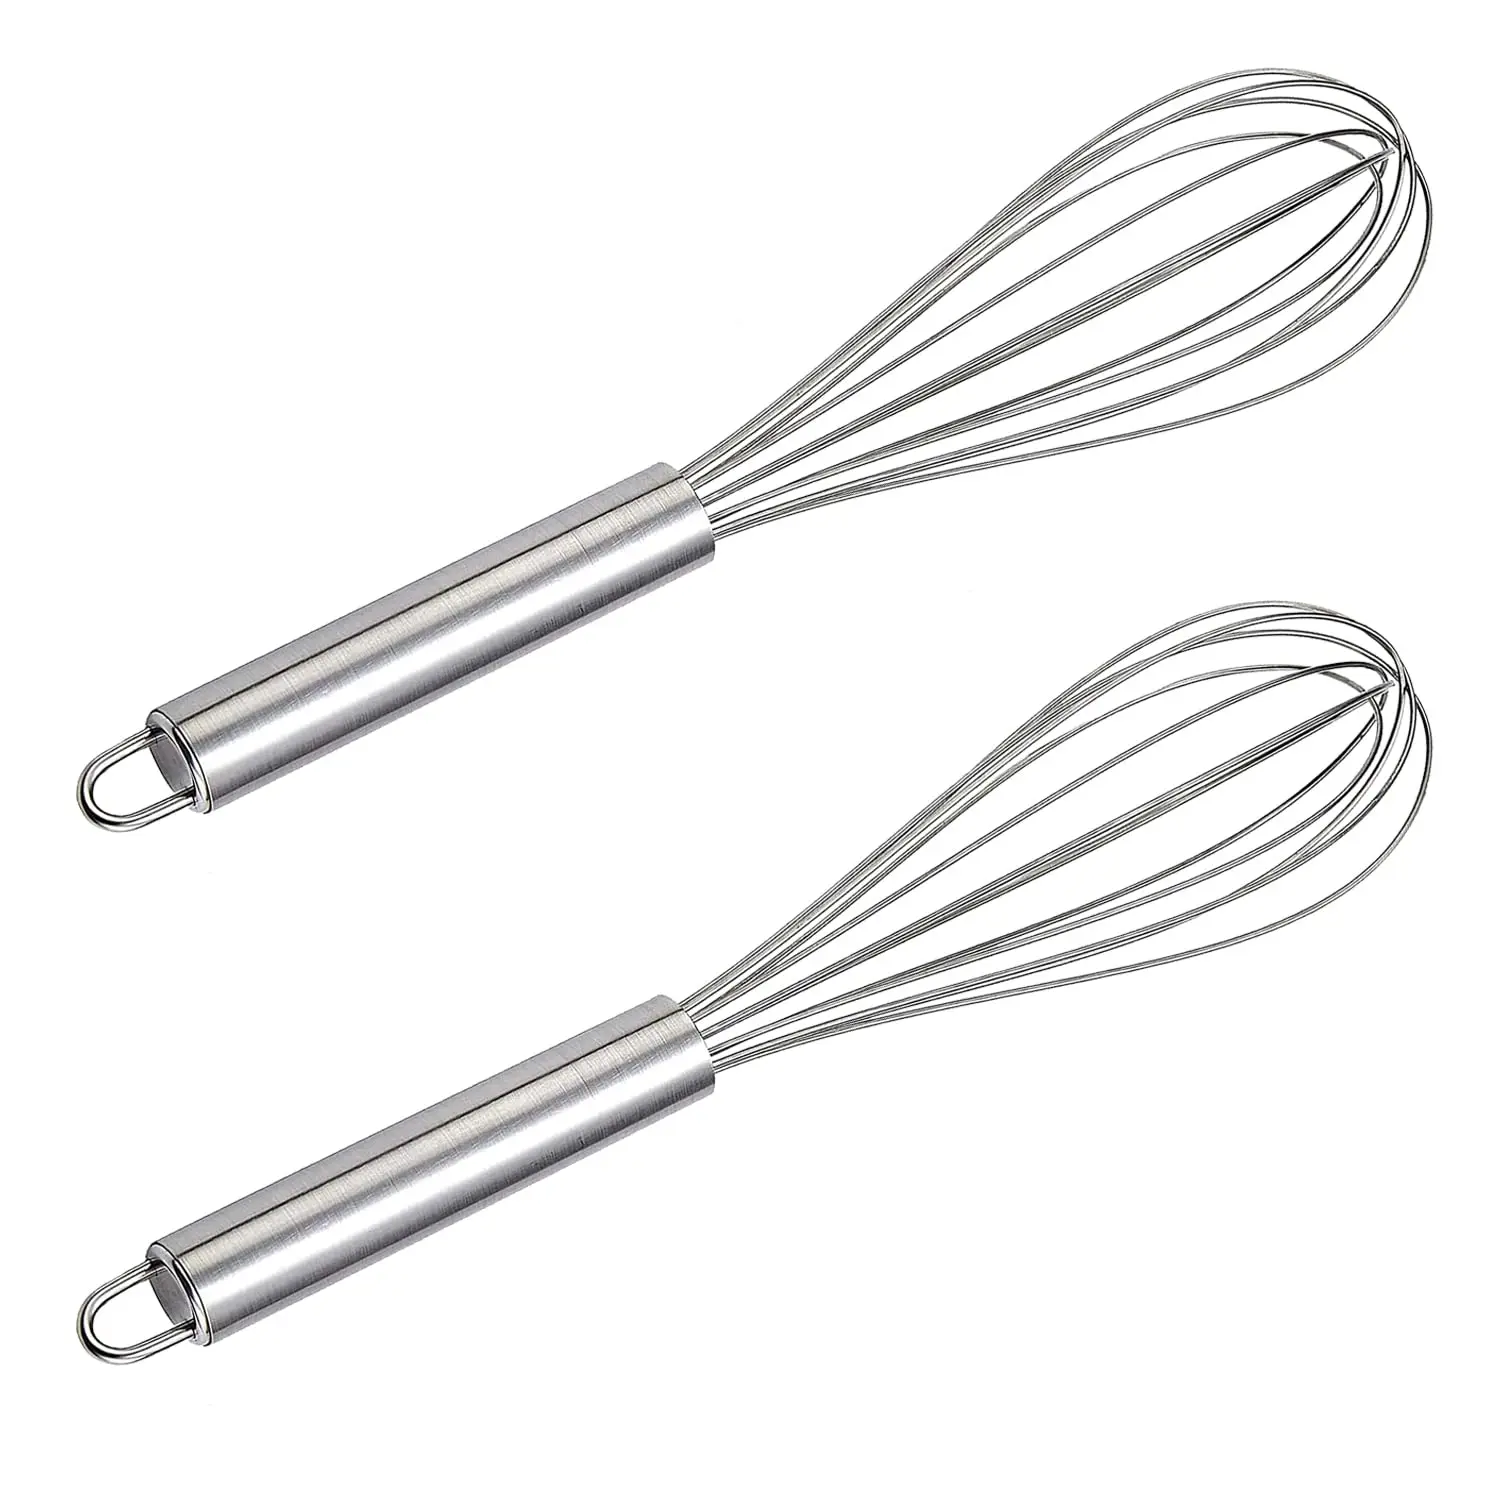 Professional manual 50cm whisk